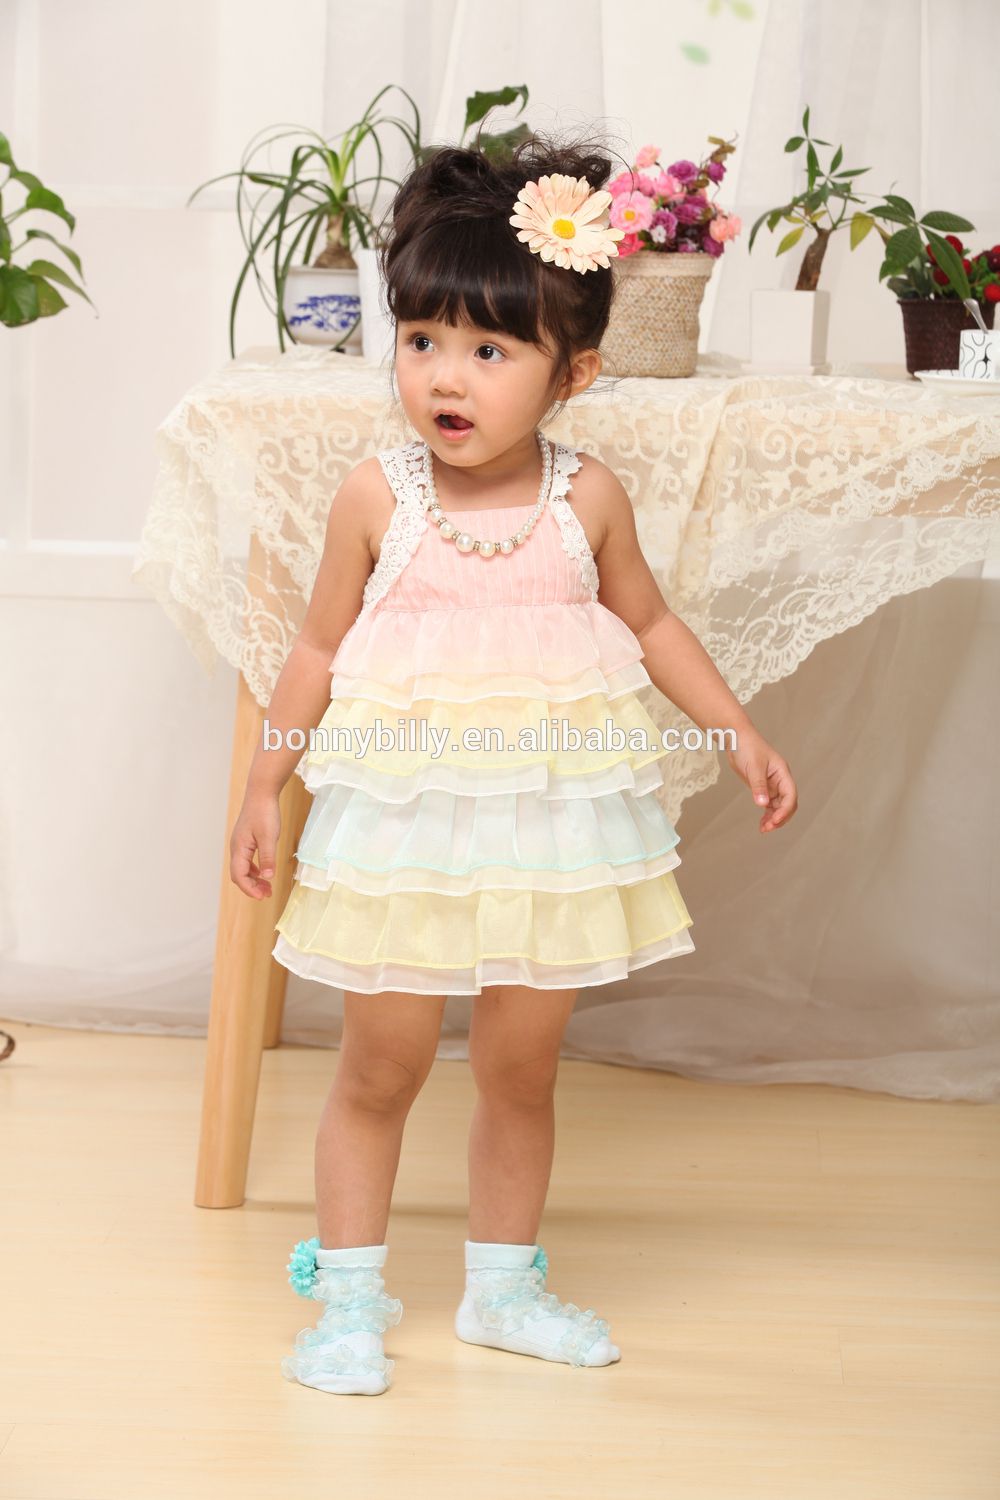 1 year old birthday dress for baby girl  Dresses Ask